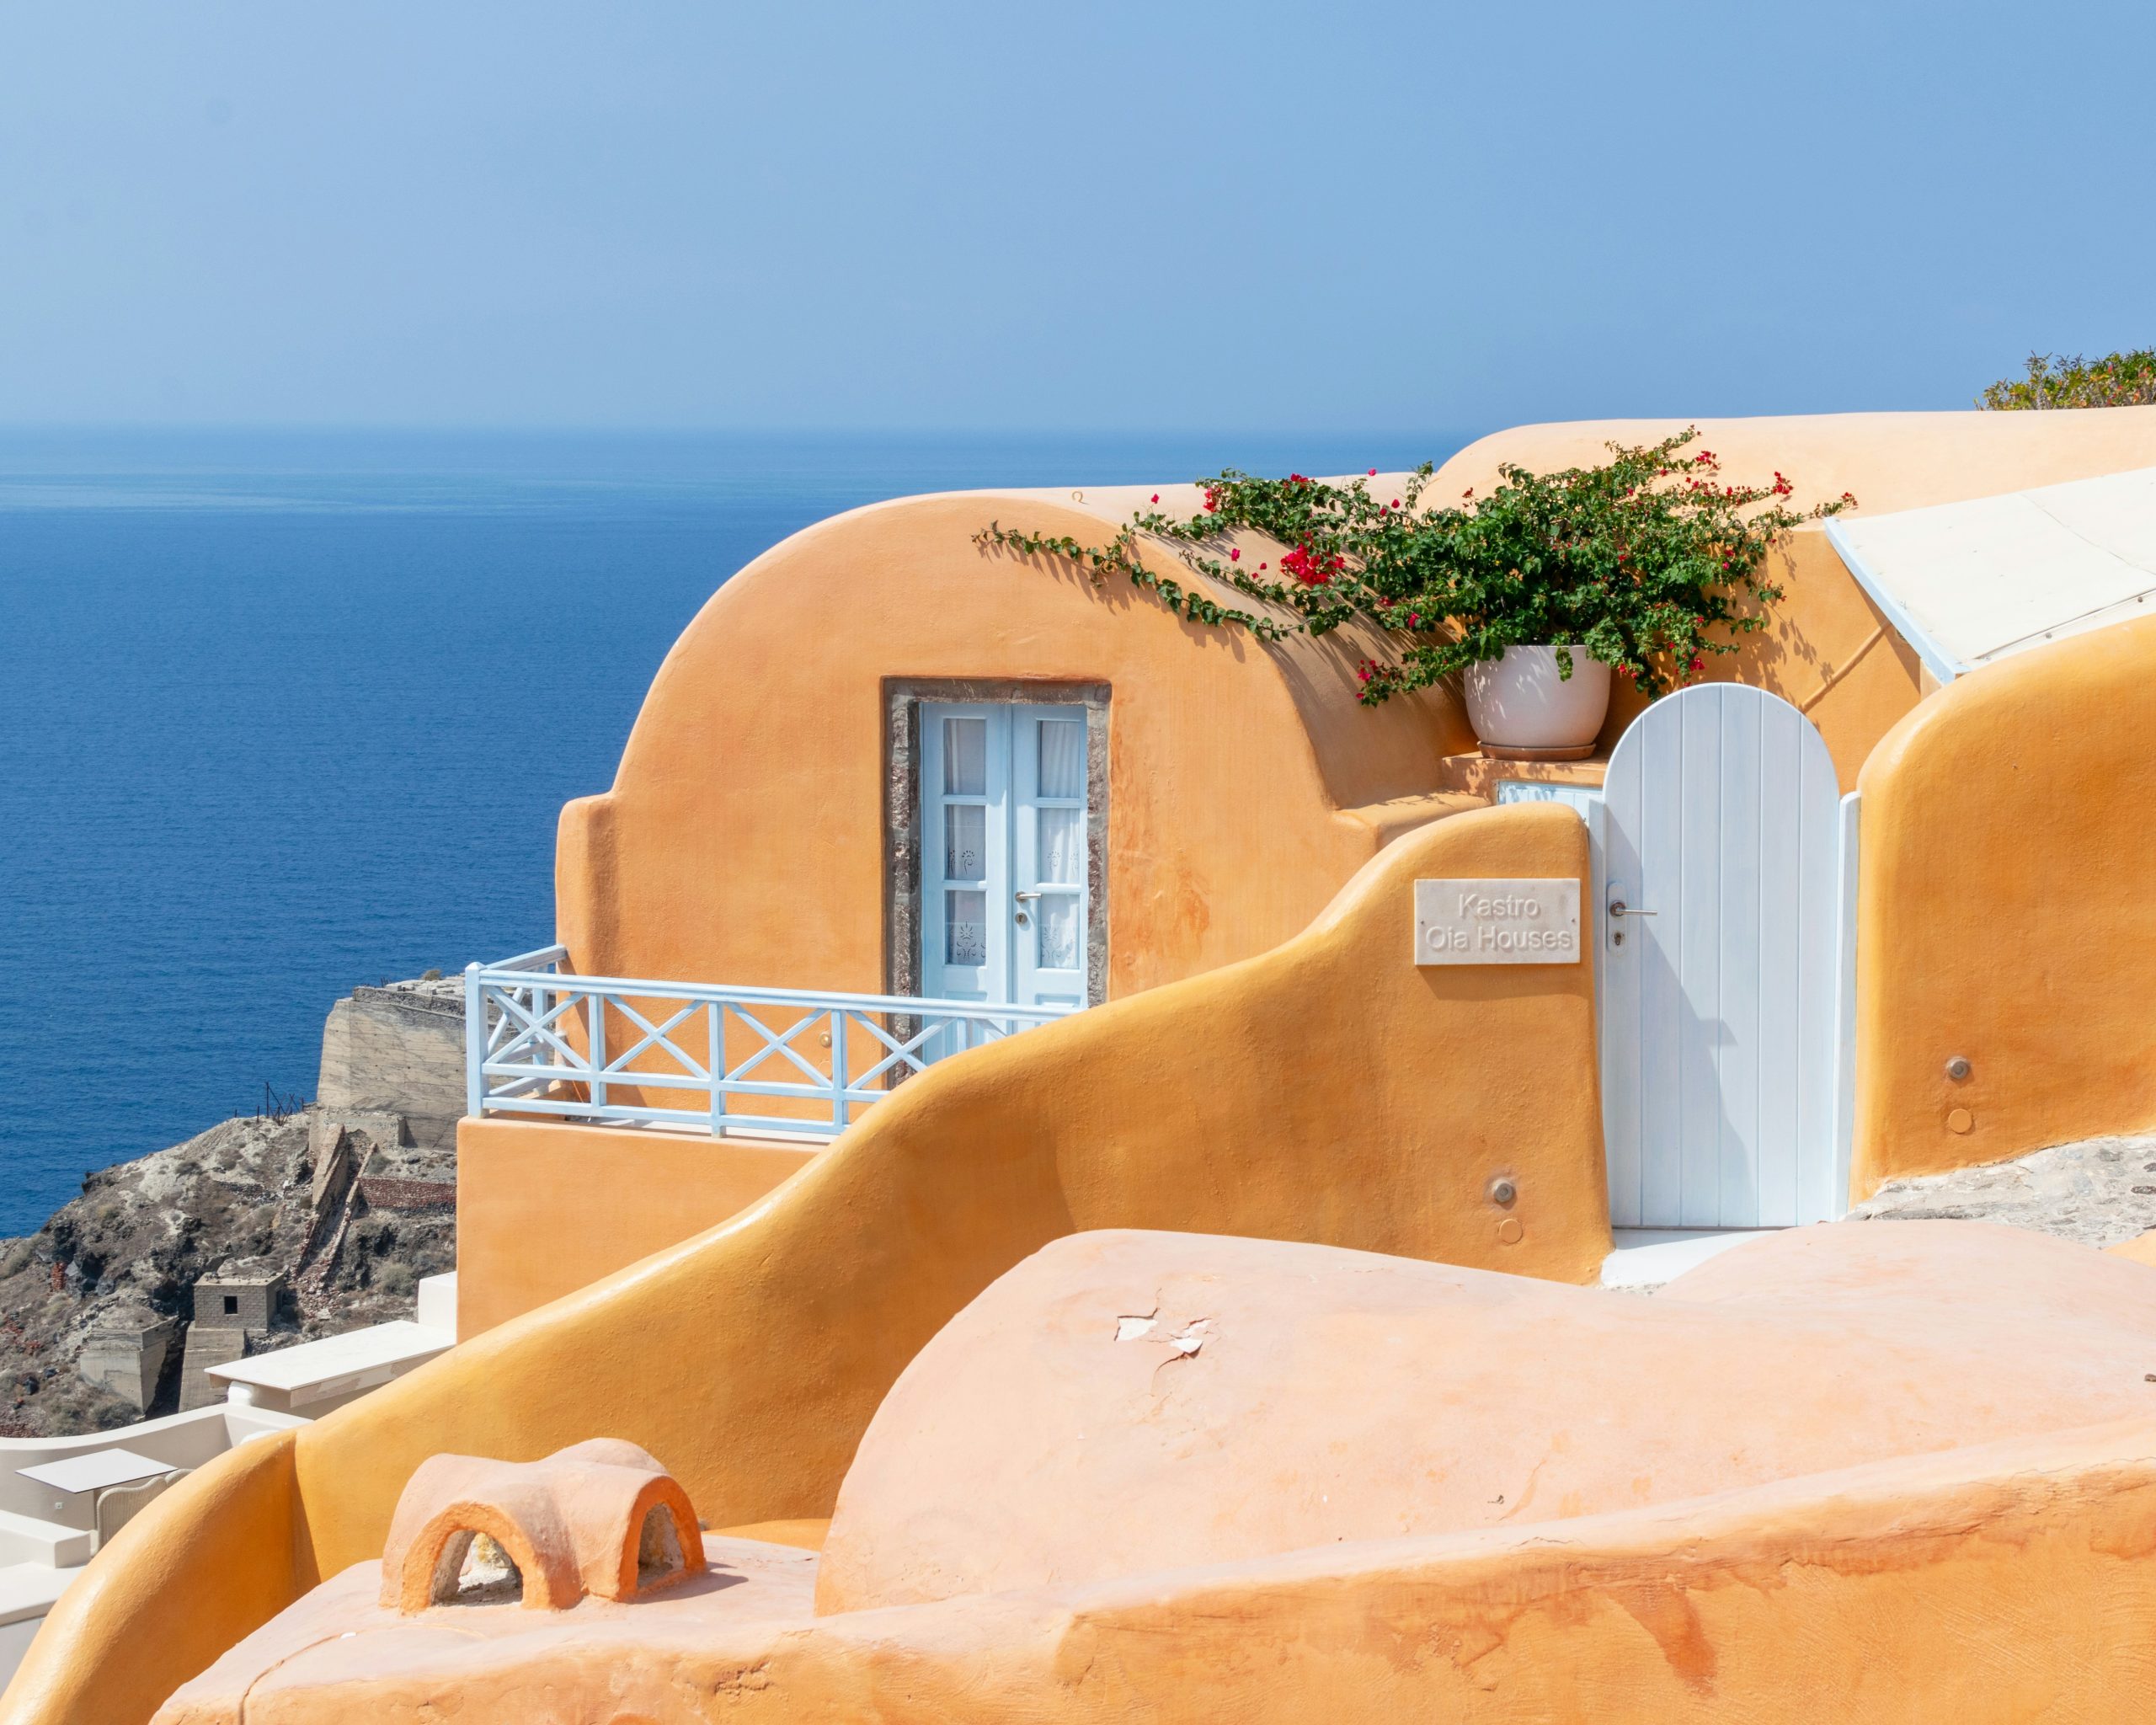 discover the beauty of santorini with its stunning vistas, white-washed buildings, and endless blue seas. plan your dream vacation to this enchanting greek island.